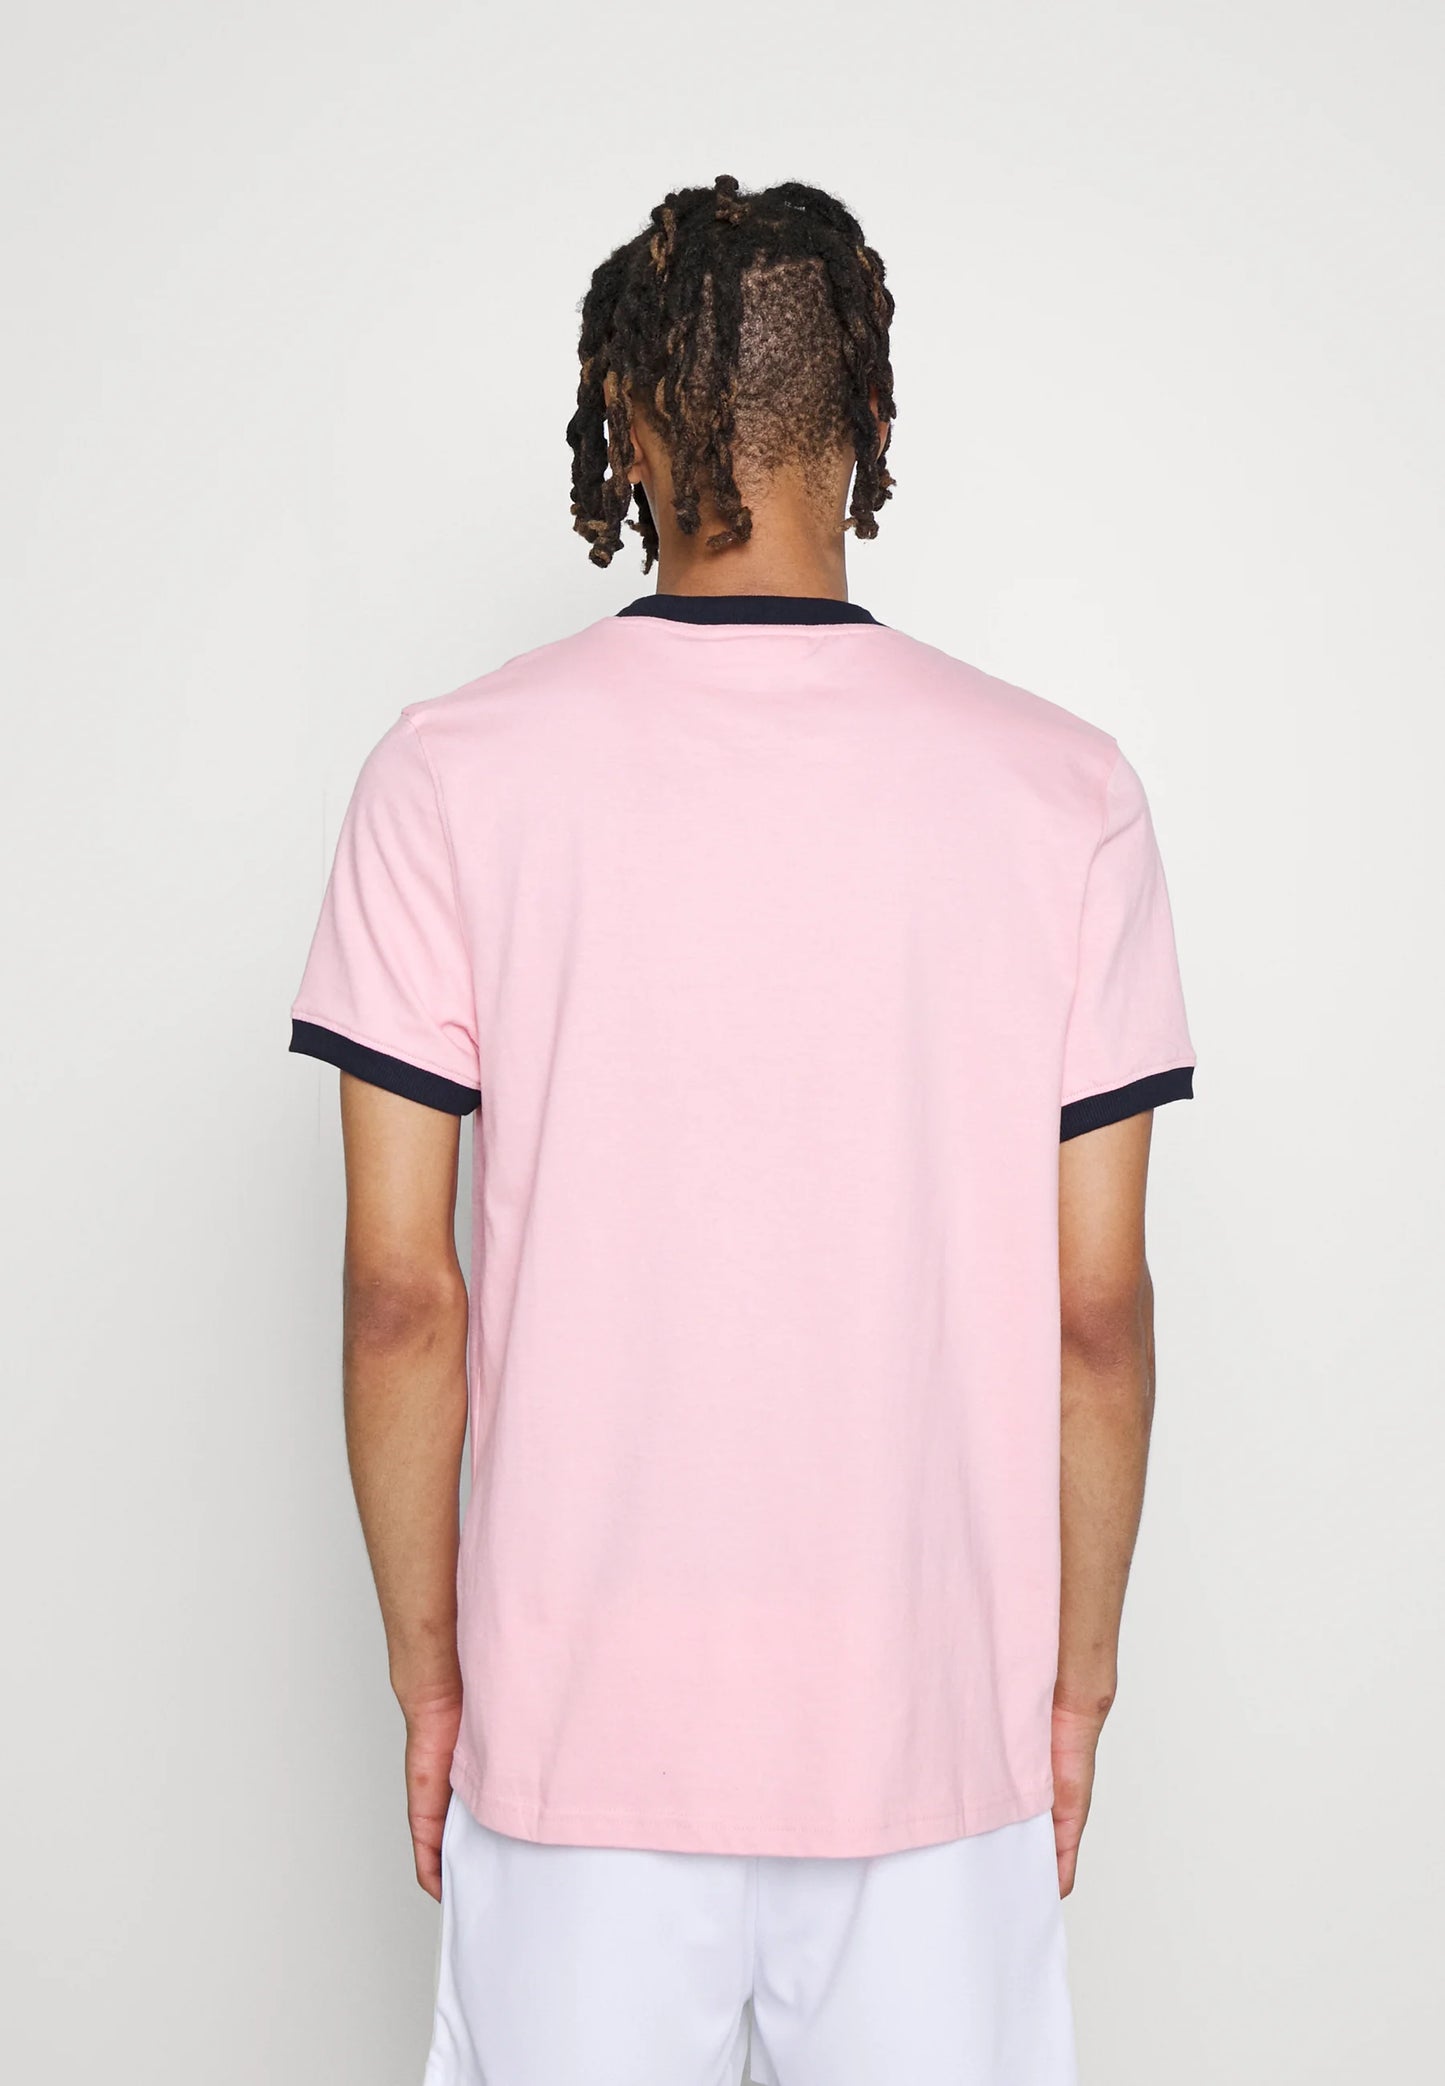 Sergio Tacchini Supermac T-Shirt in pink